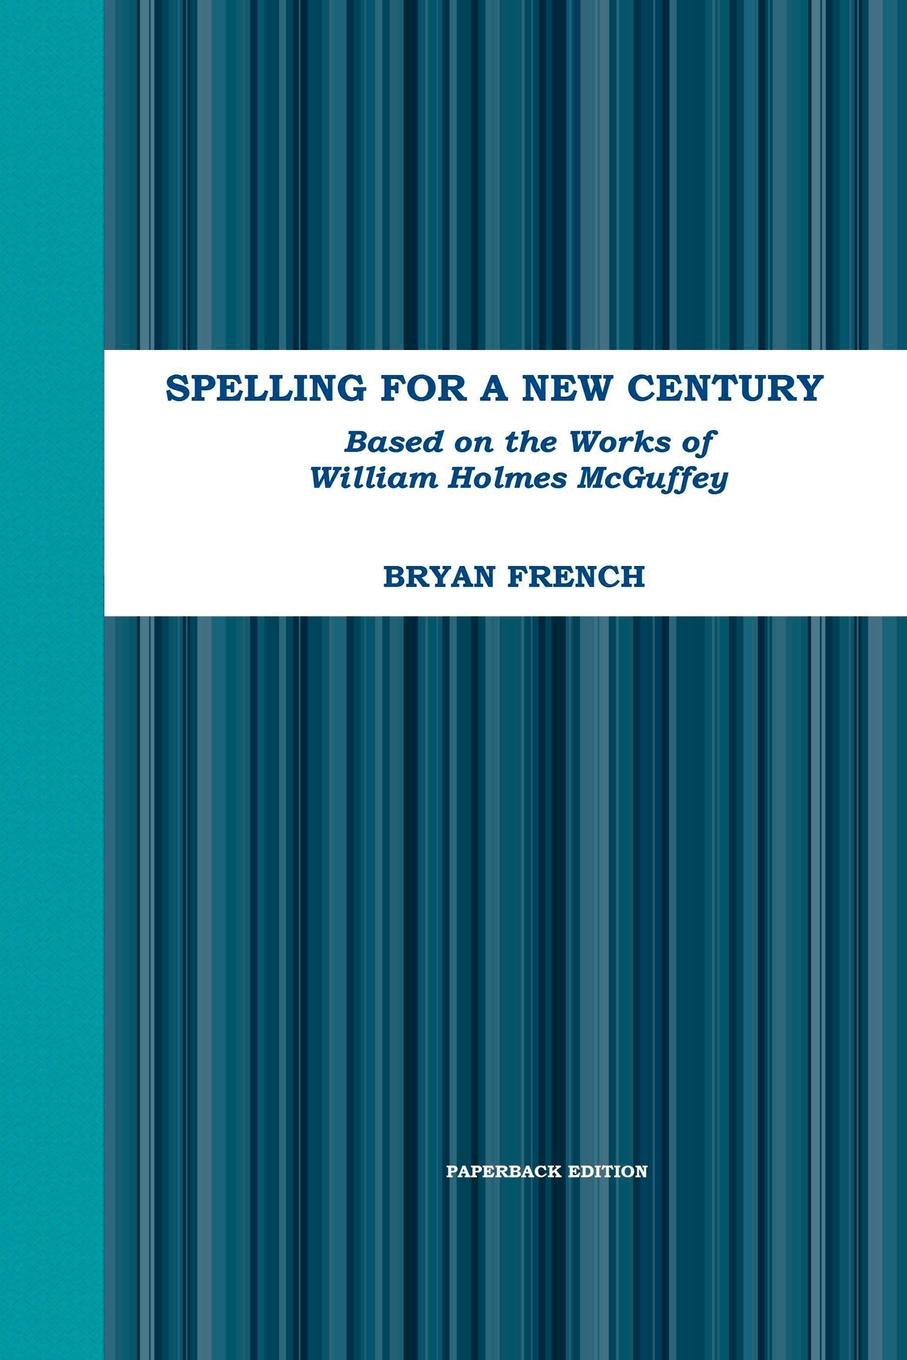 Spelling for a New Century. Based on the Works of William Holmes McGuffey